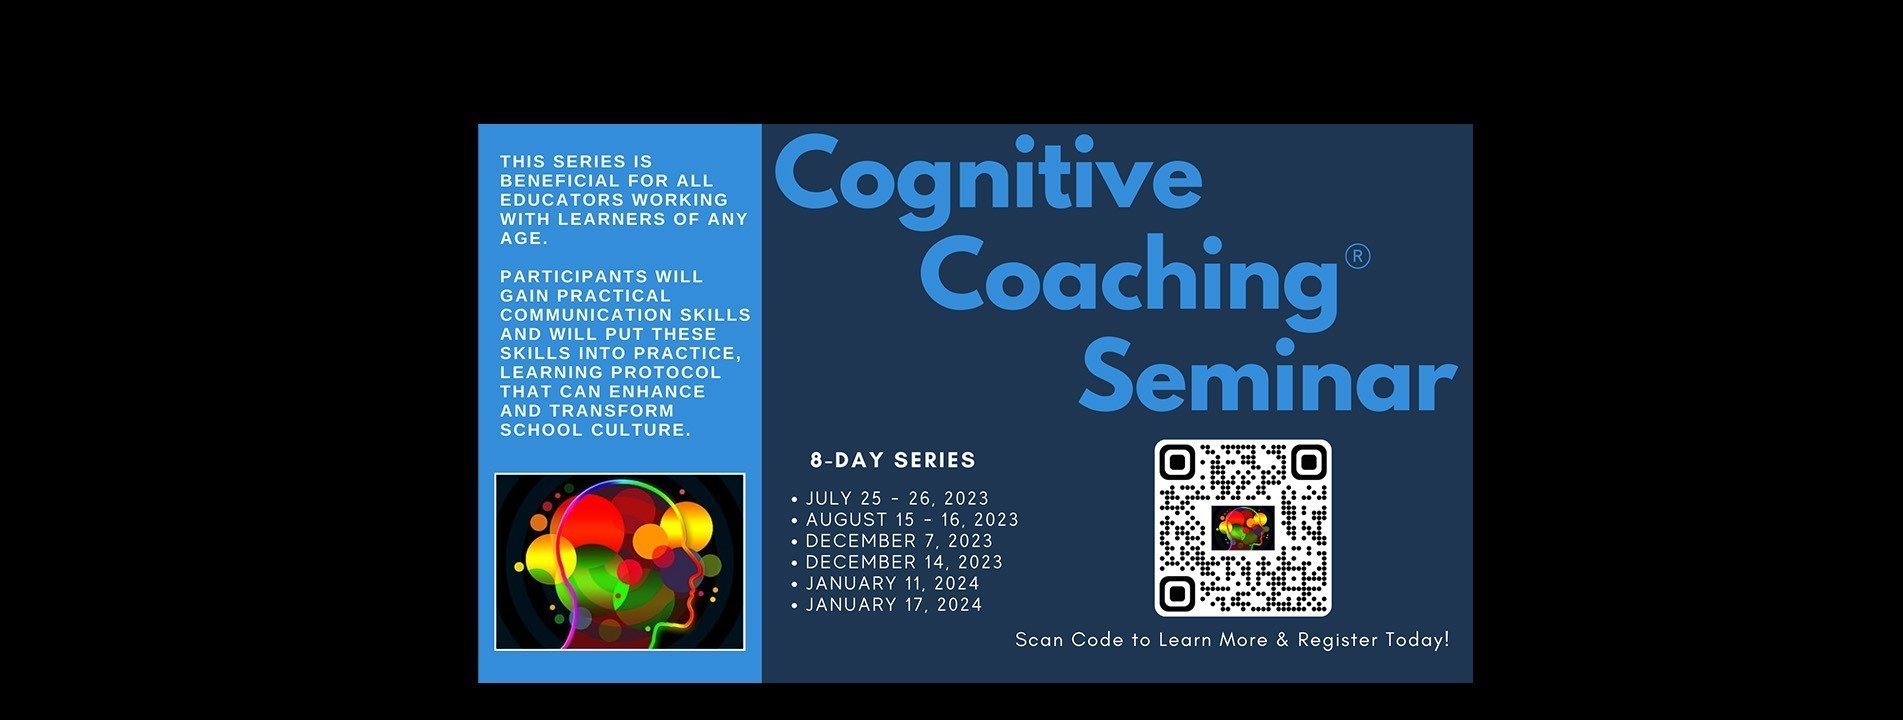 Cognitive Coaching Seminar. This series is beneficial for all educators working with learners of any age. Participants will gain practical communication skills and will put these skills into practice, learning protocol that can enhance and transform school culture. 8-day series: July 25 -26, 2023; August 15-16, 2023; December 7, 2023; December 14, 2023; January 11, 2024; and January 17, 2024. 